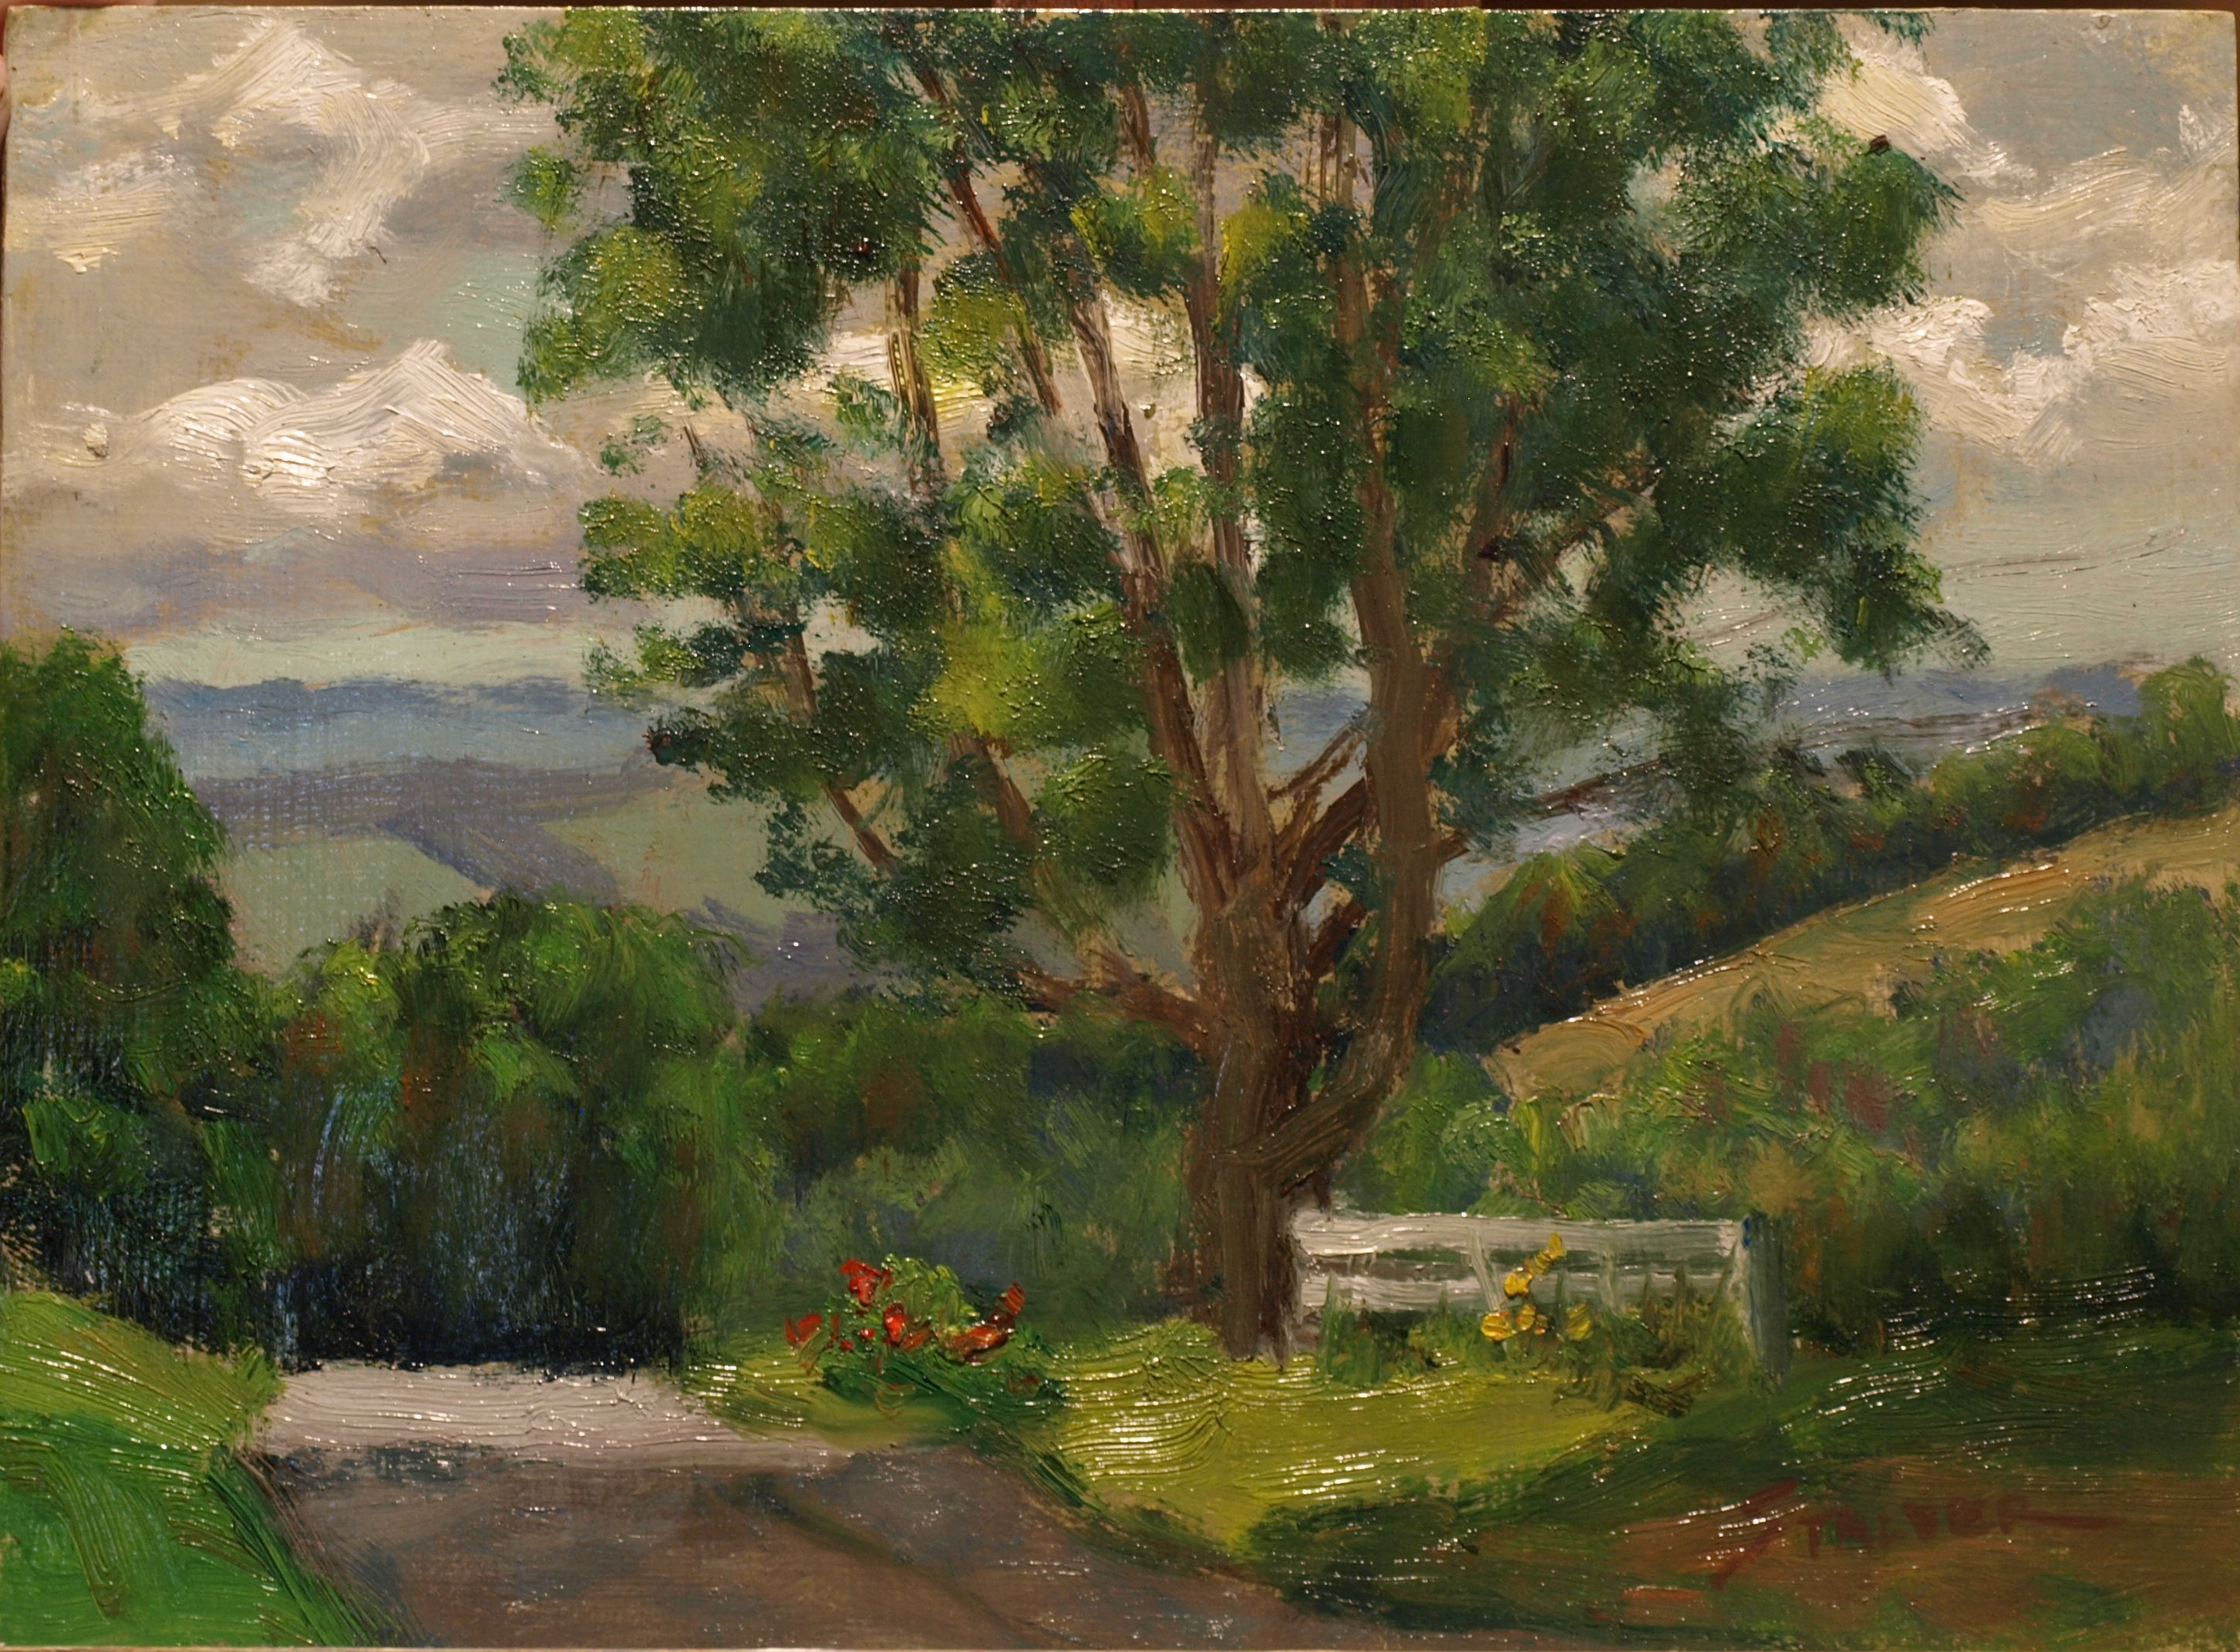 View from Geer Mountain, Oil on Panel, 9 x 12 Inches, by Richard Stalter, $220